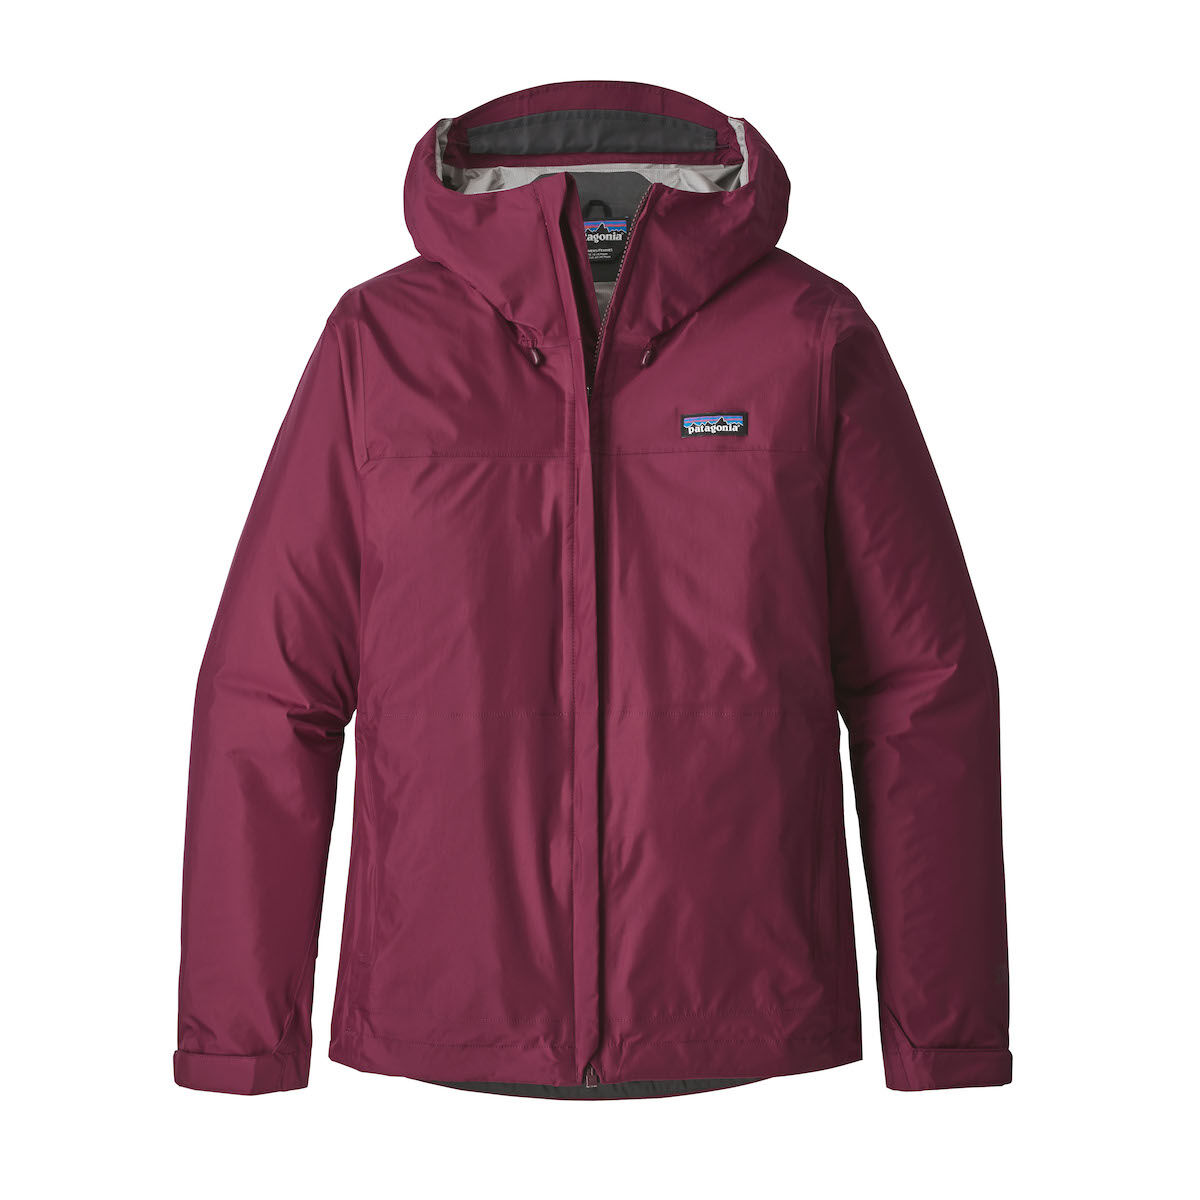 Patagonia - Torrentshell - Chaqueta impermeable - Mujer